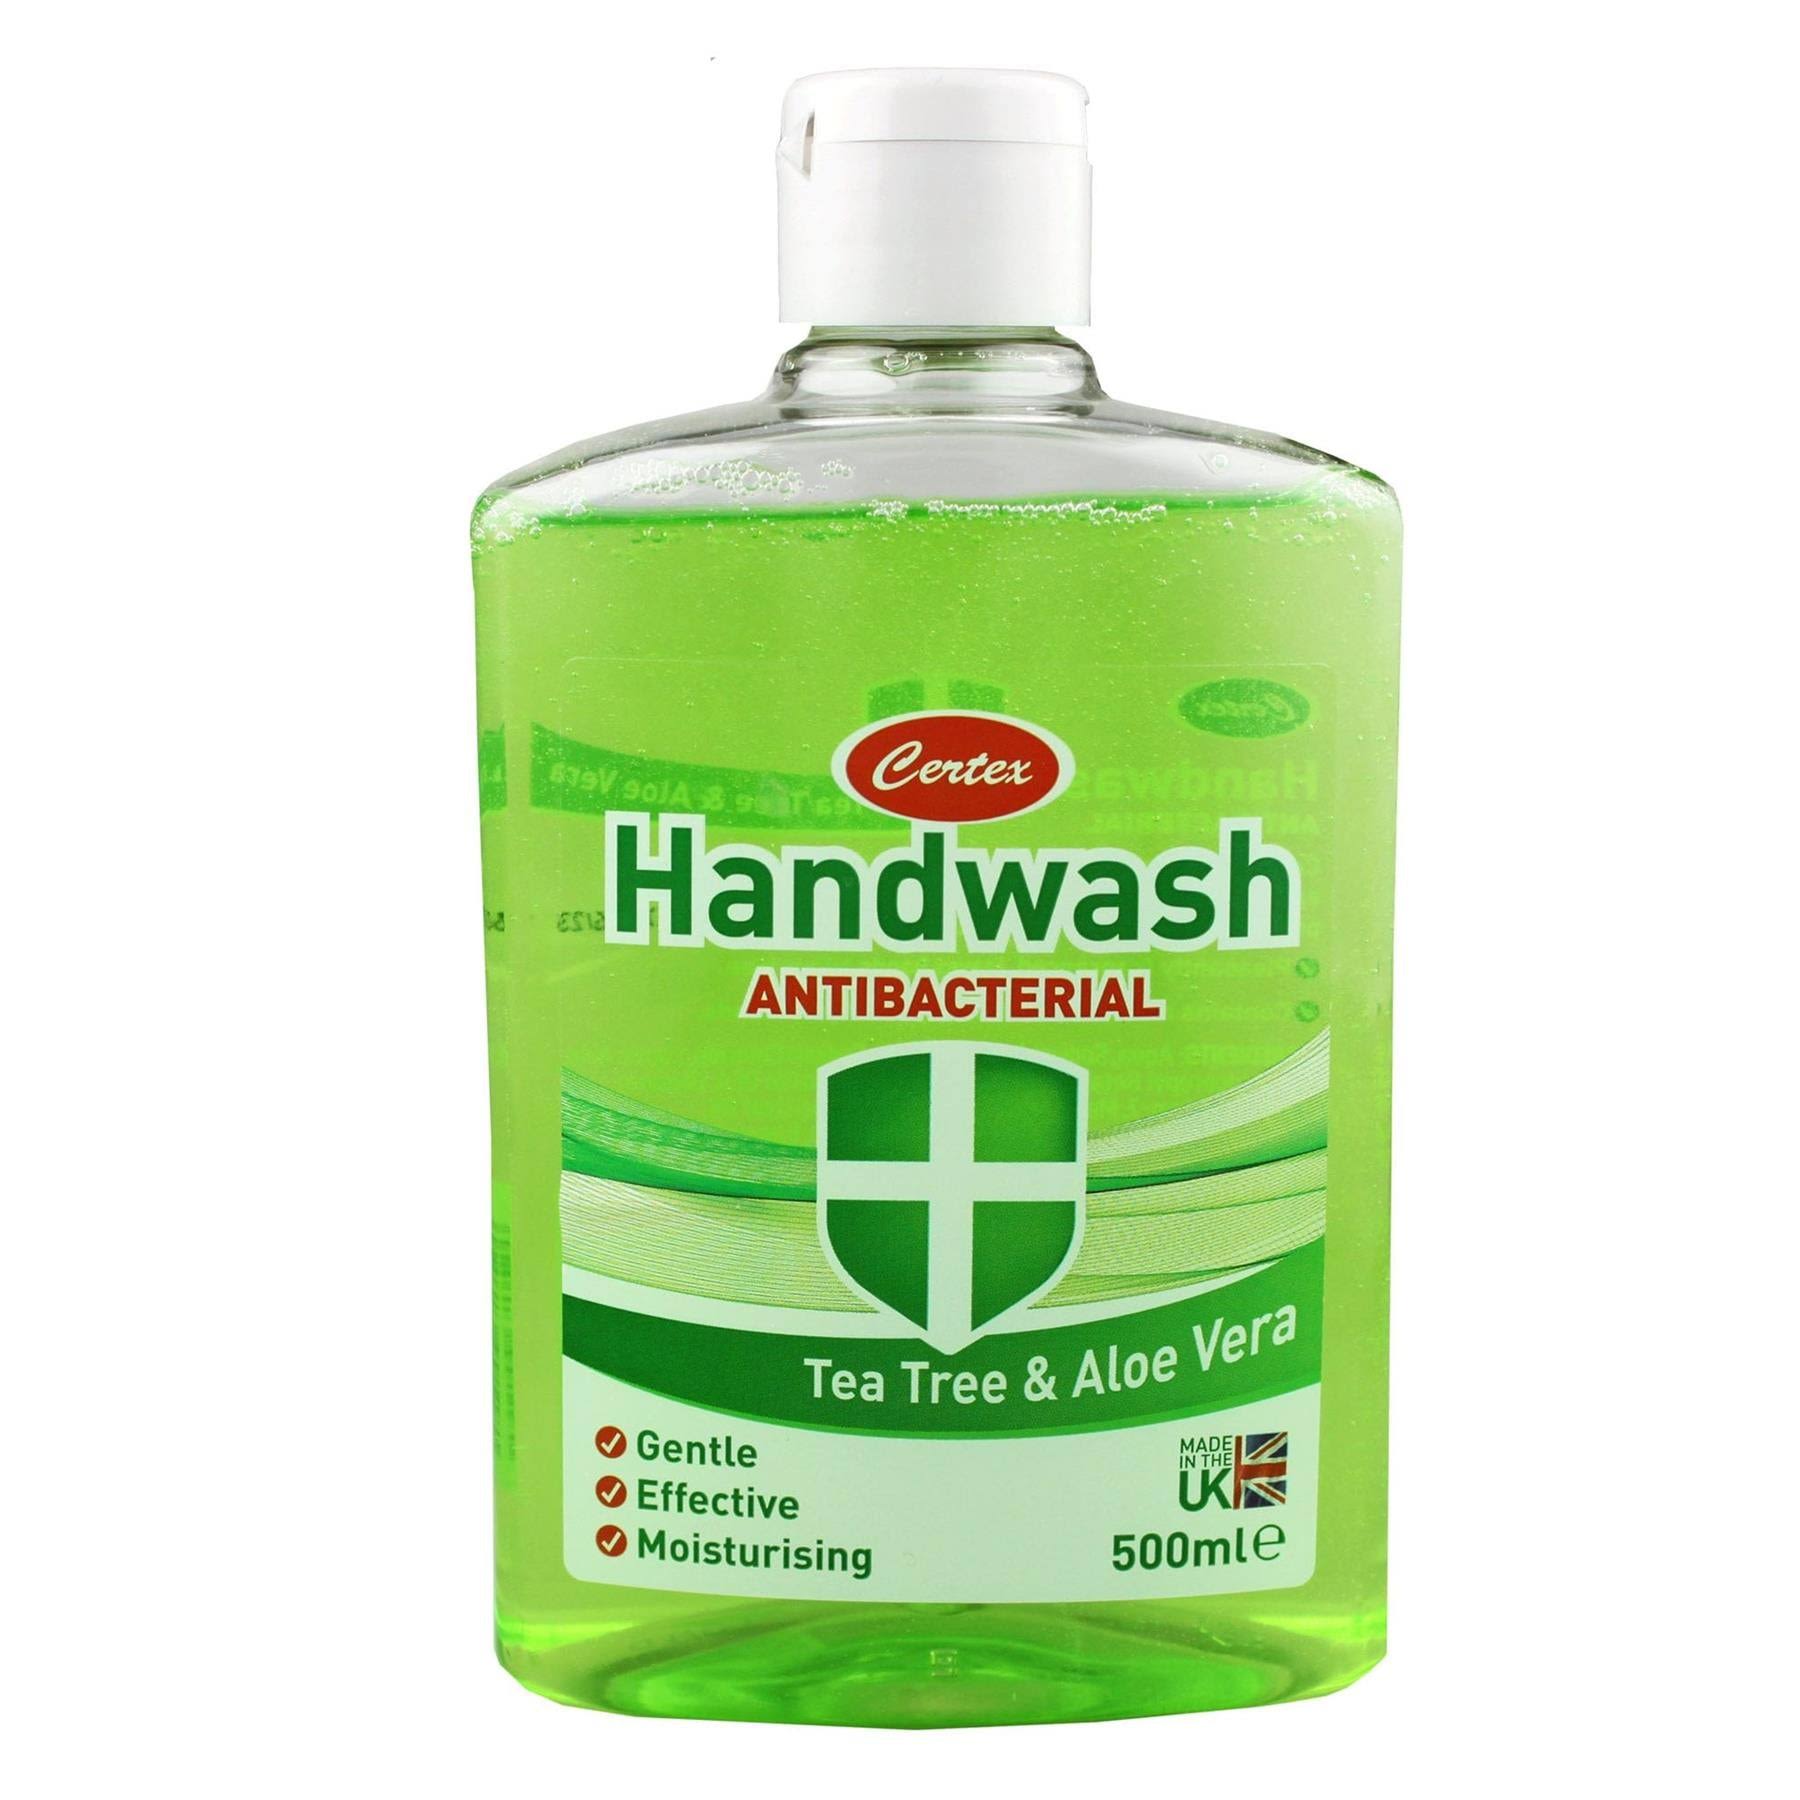 Certex Antibacterial Green Hand Wash | Personal Care | Free Shipping On All Orders | Best Price Guarantee | 30 Day Money Back Guarantee